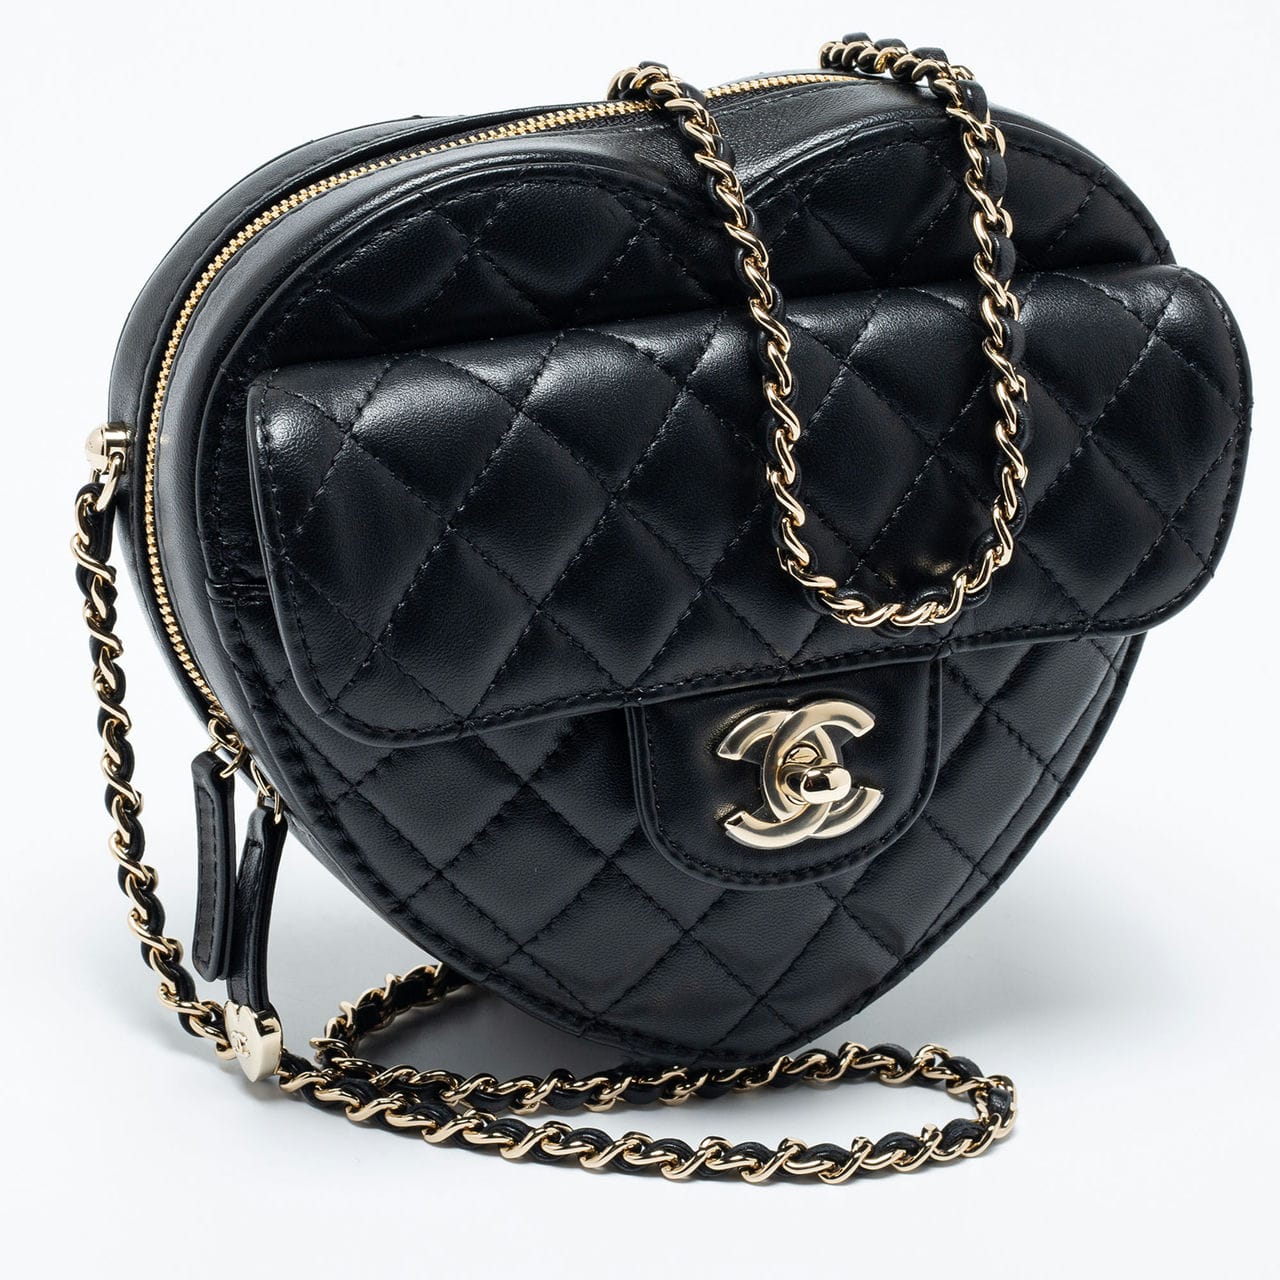 The Chanel Heart Bag is this season's 'It' bag – Inside The Closet